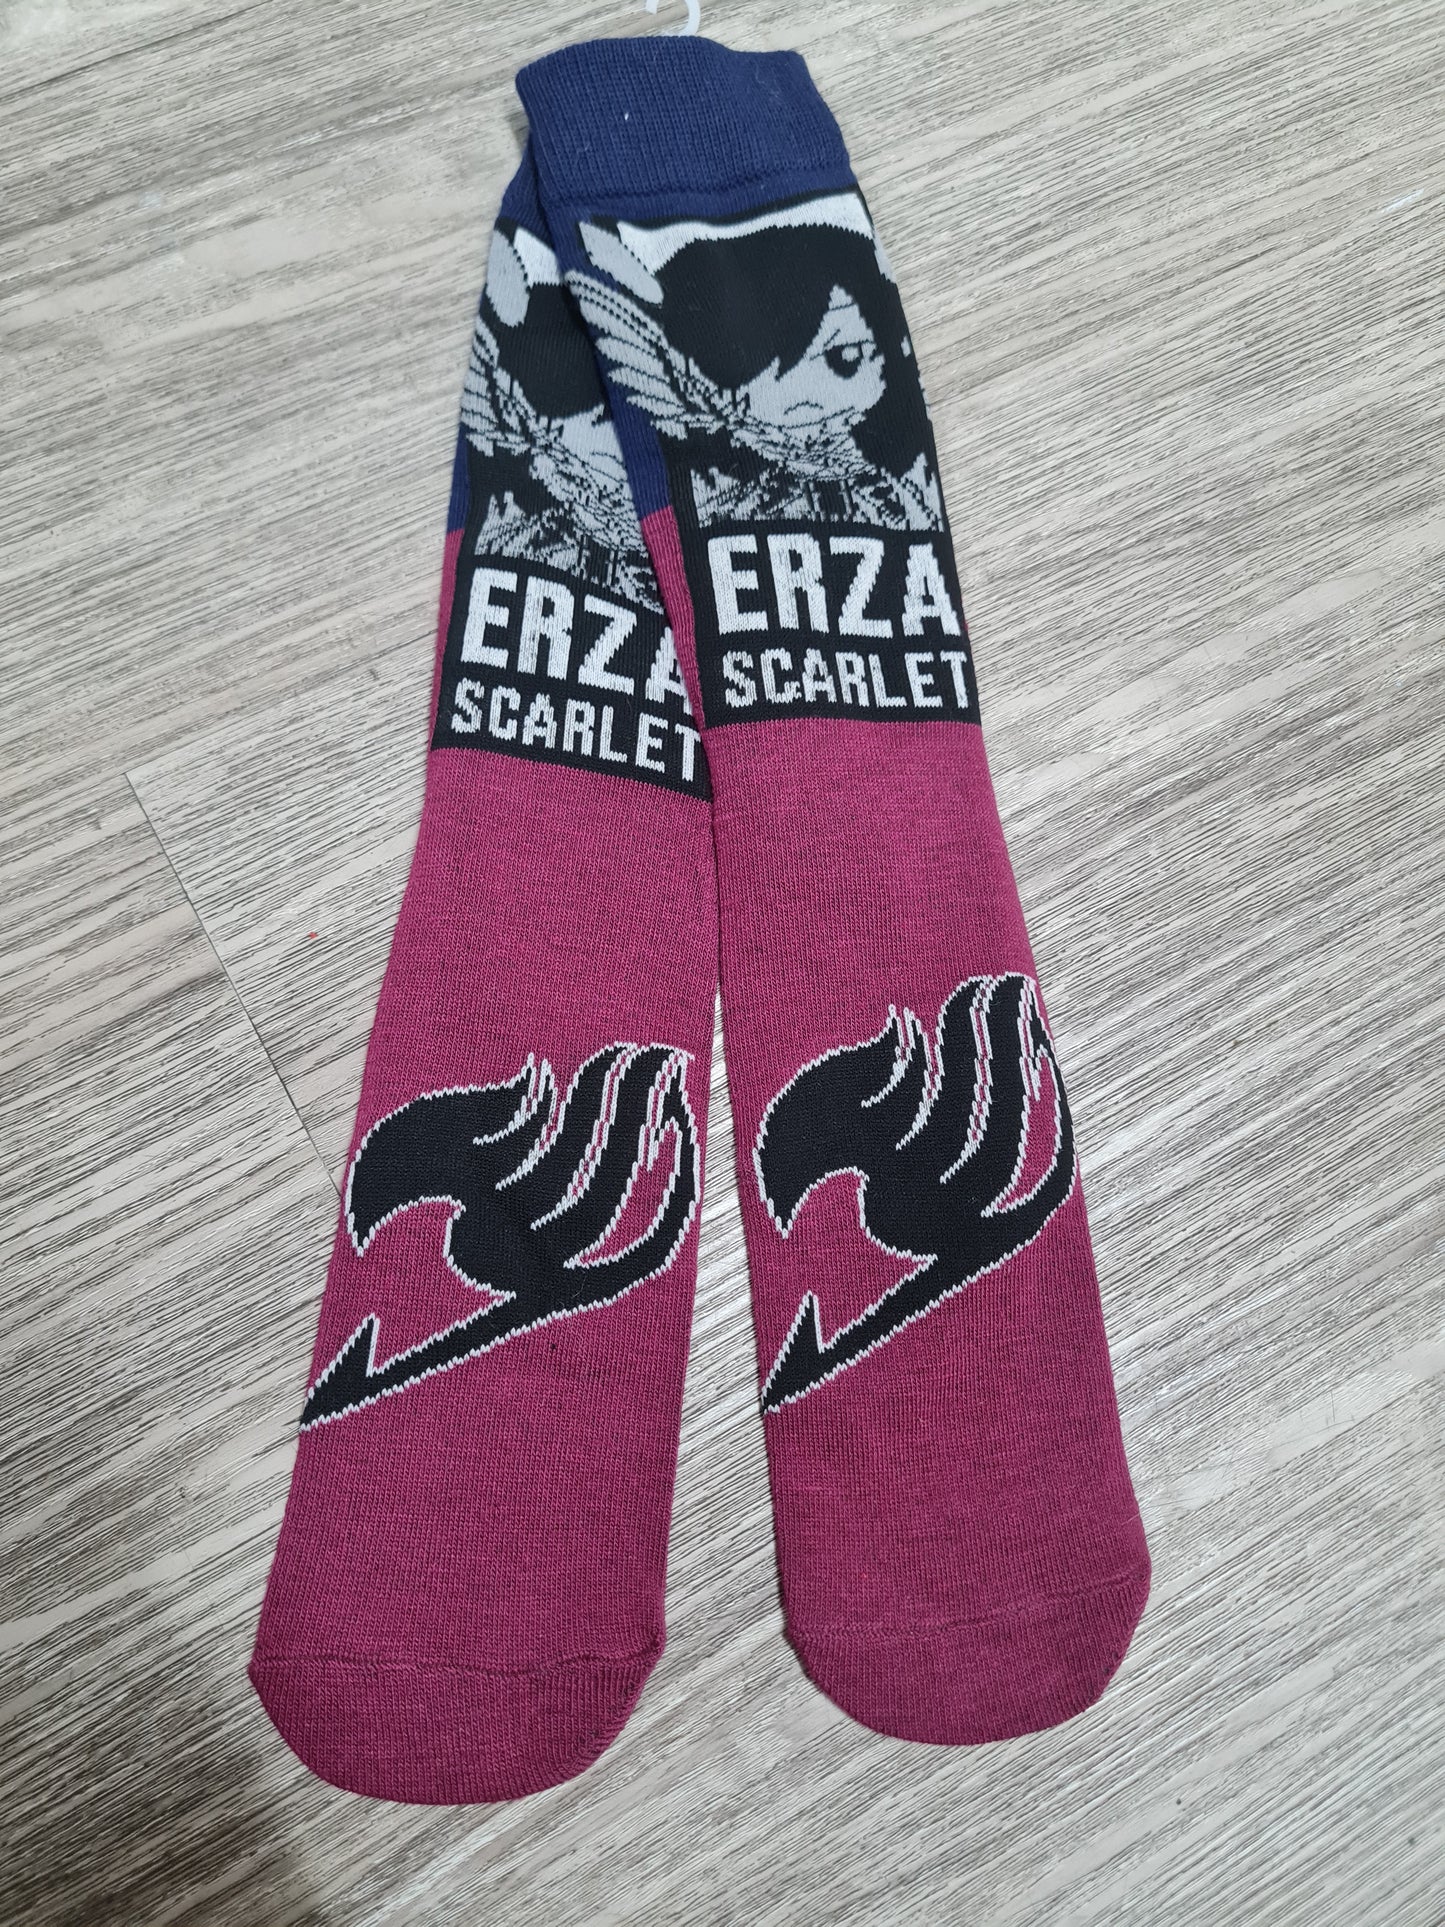 Calcetines Erza Scarlet